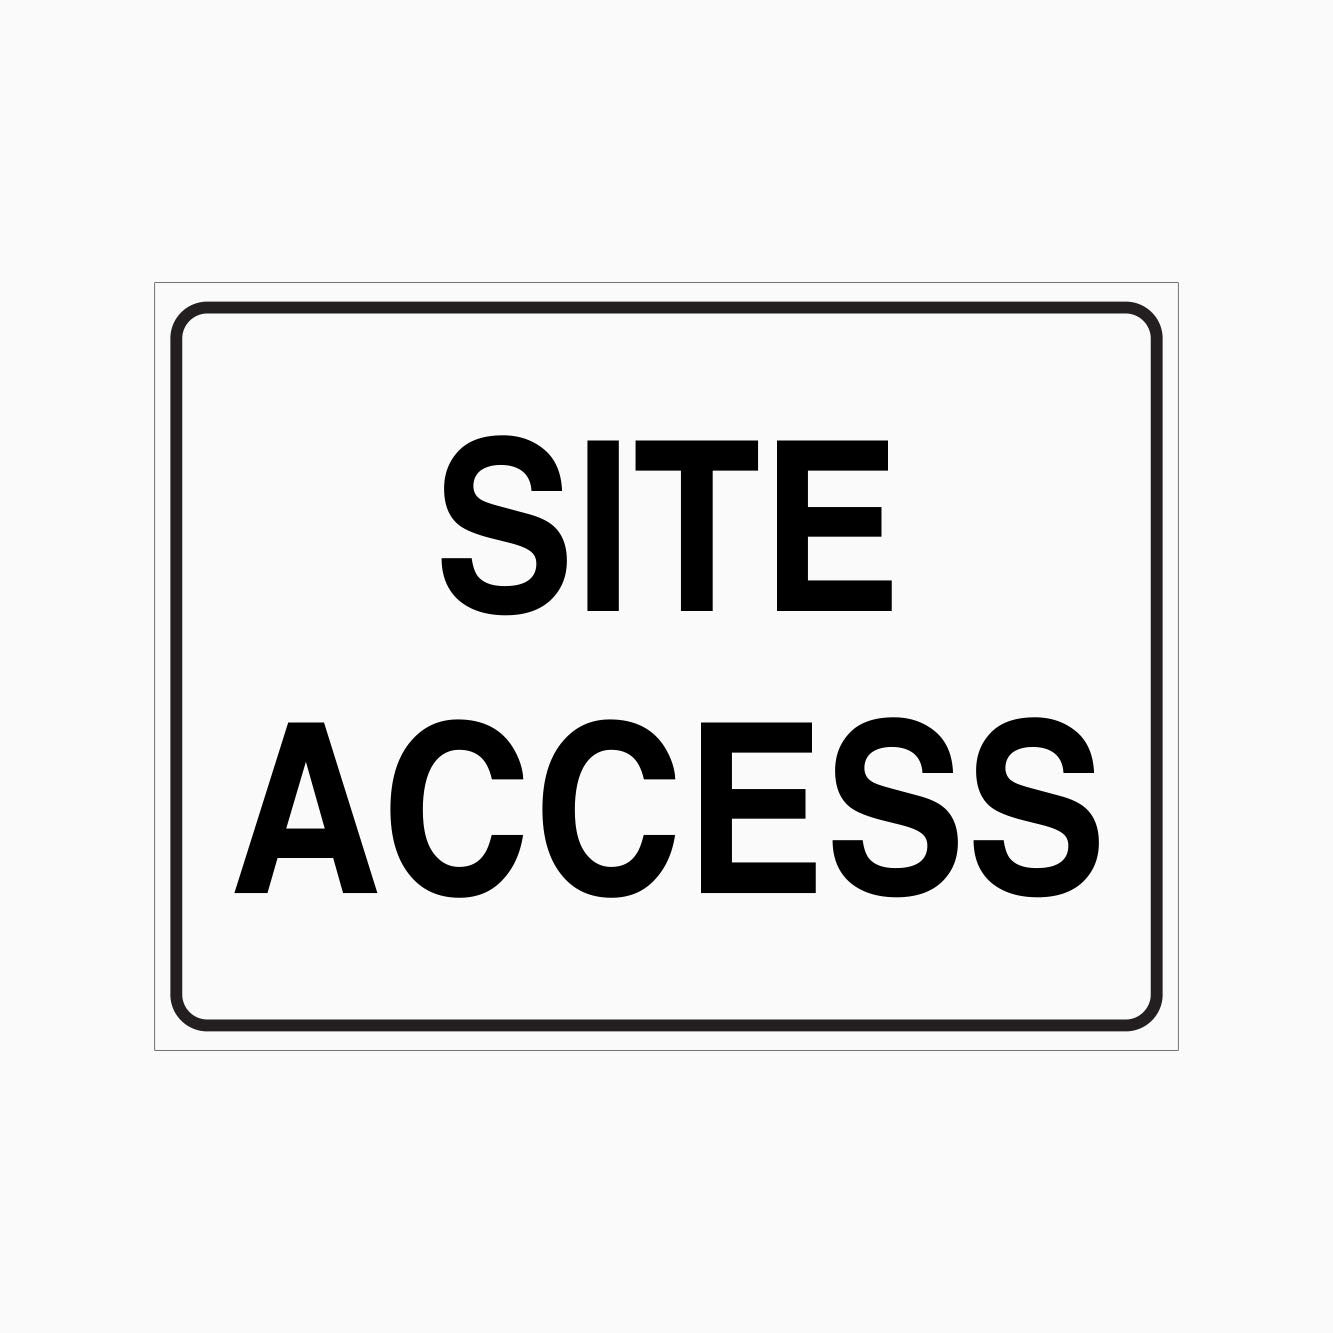 SITE ACCESS SIGN